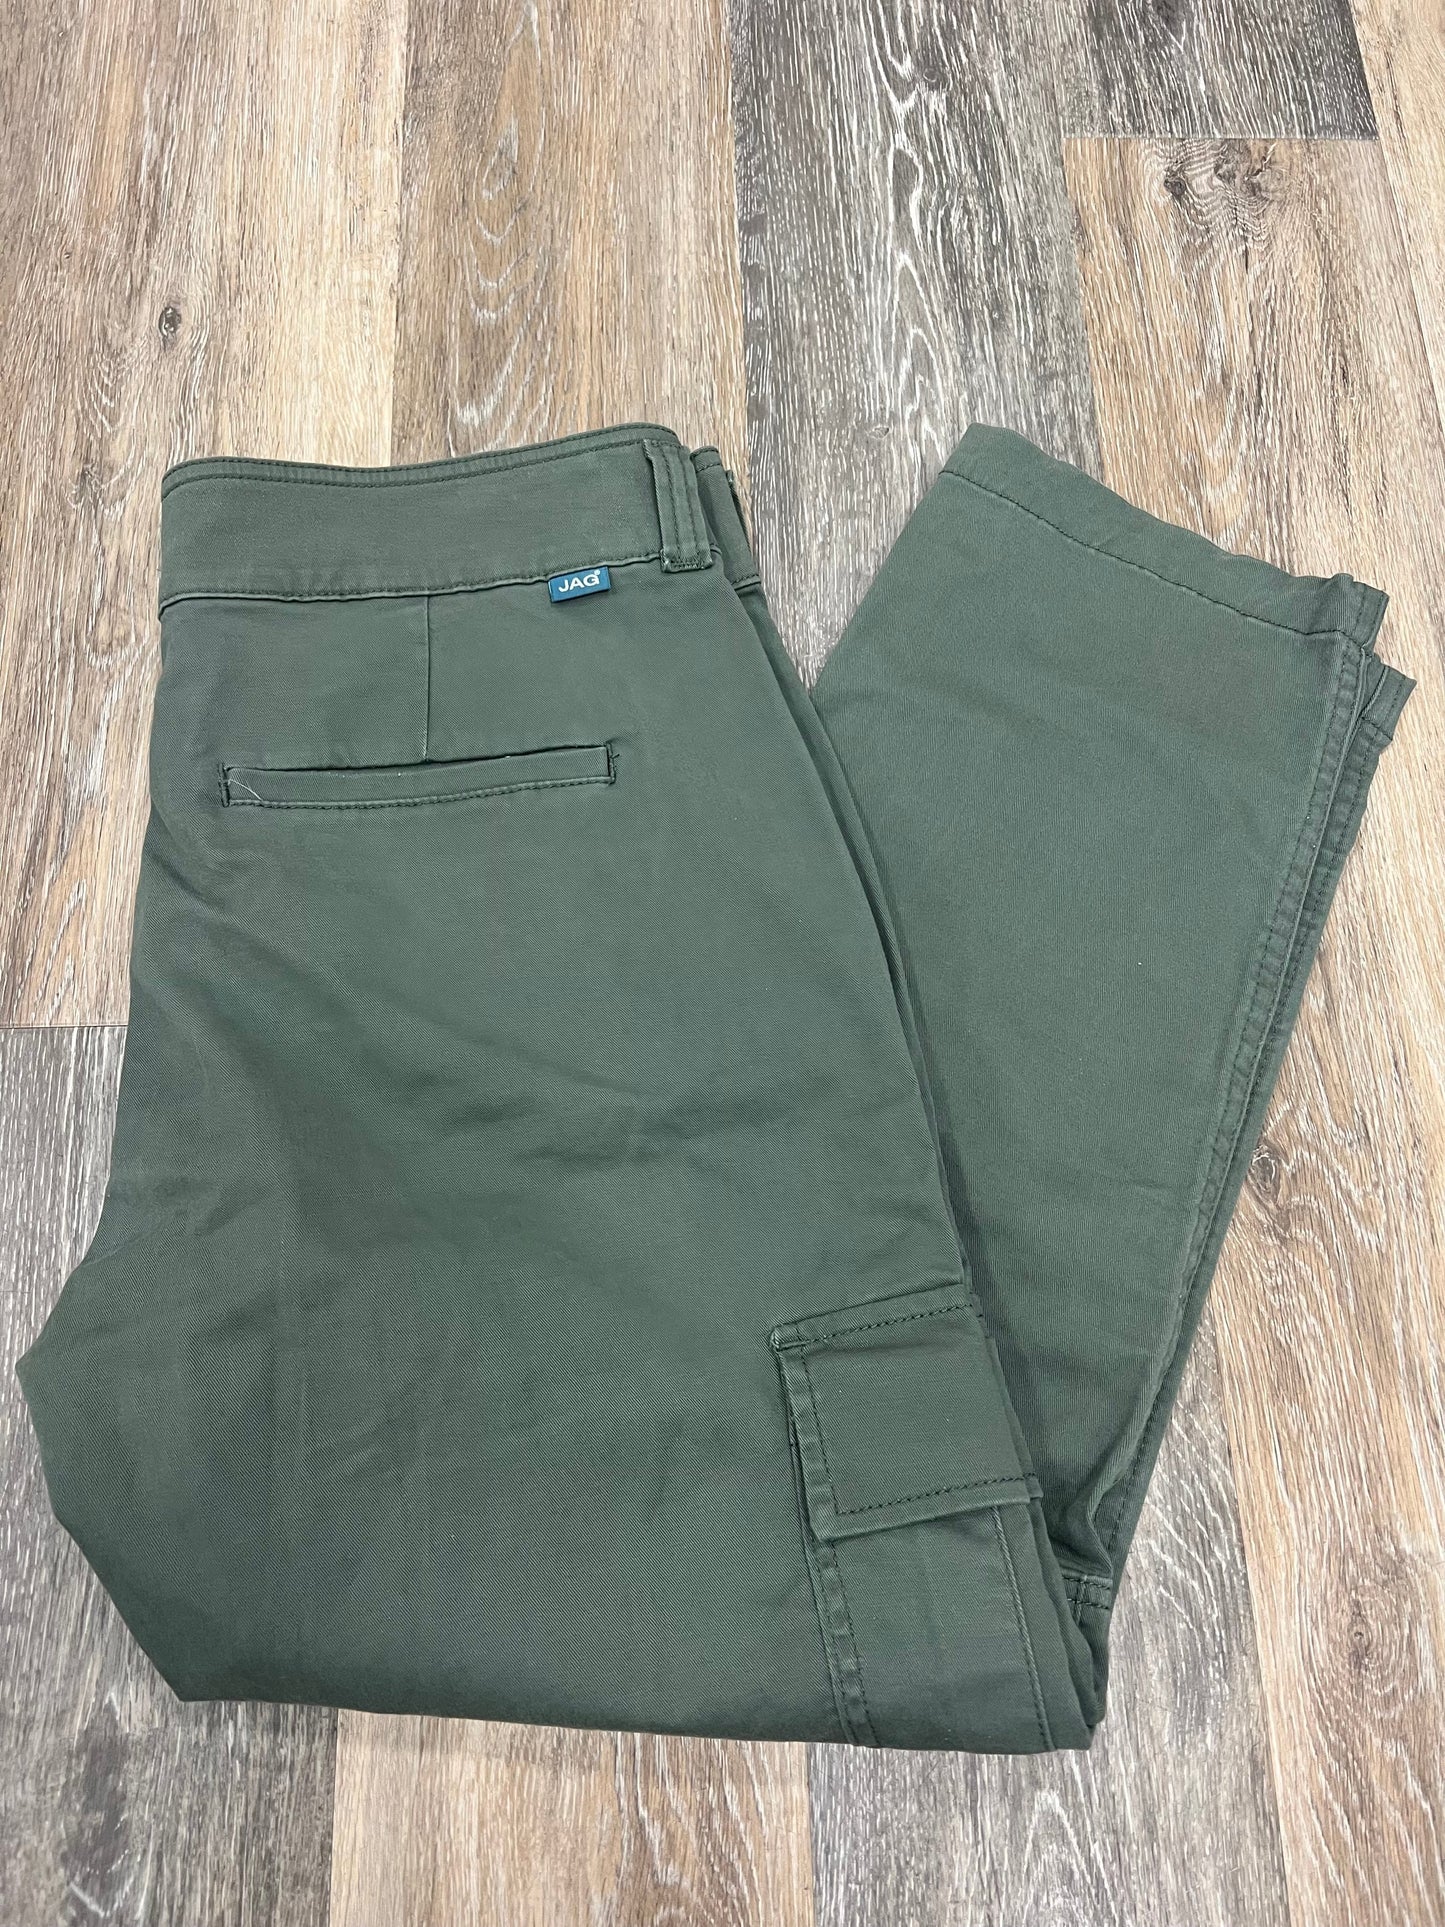 Pants Cargo & Utility By Jag  Size: 12